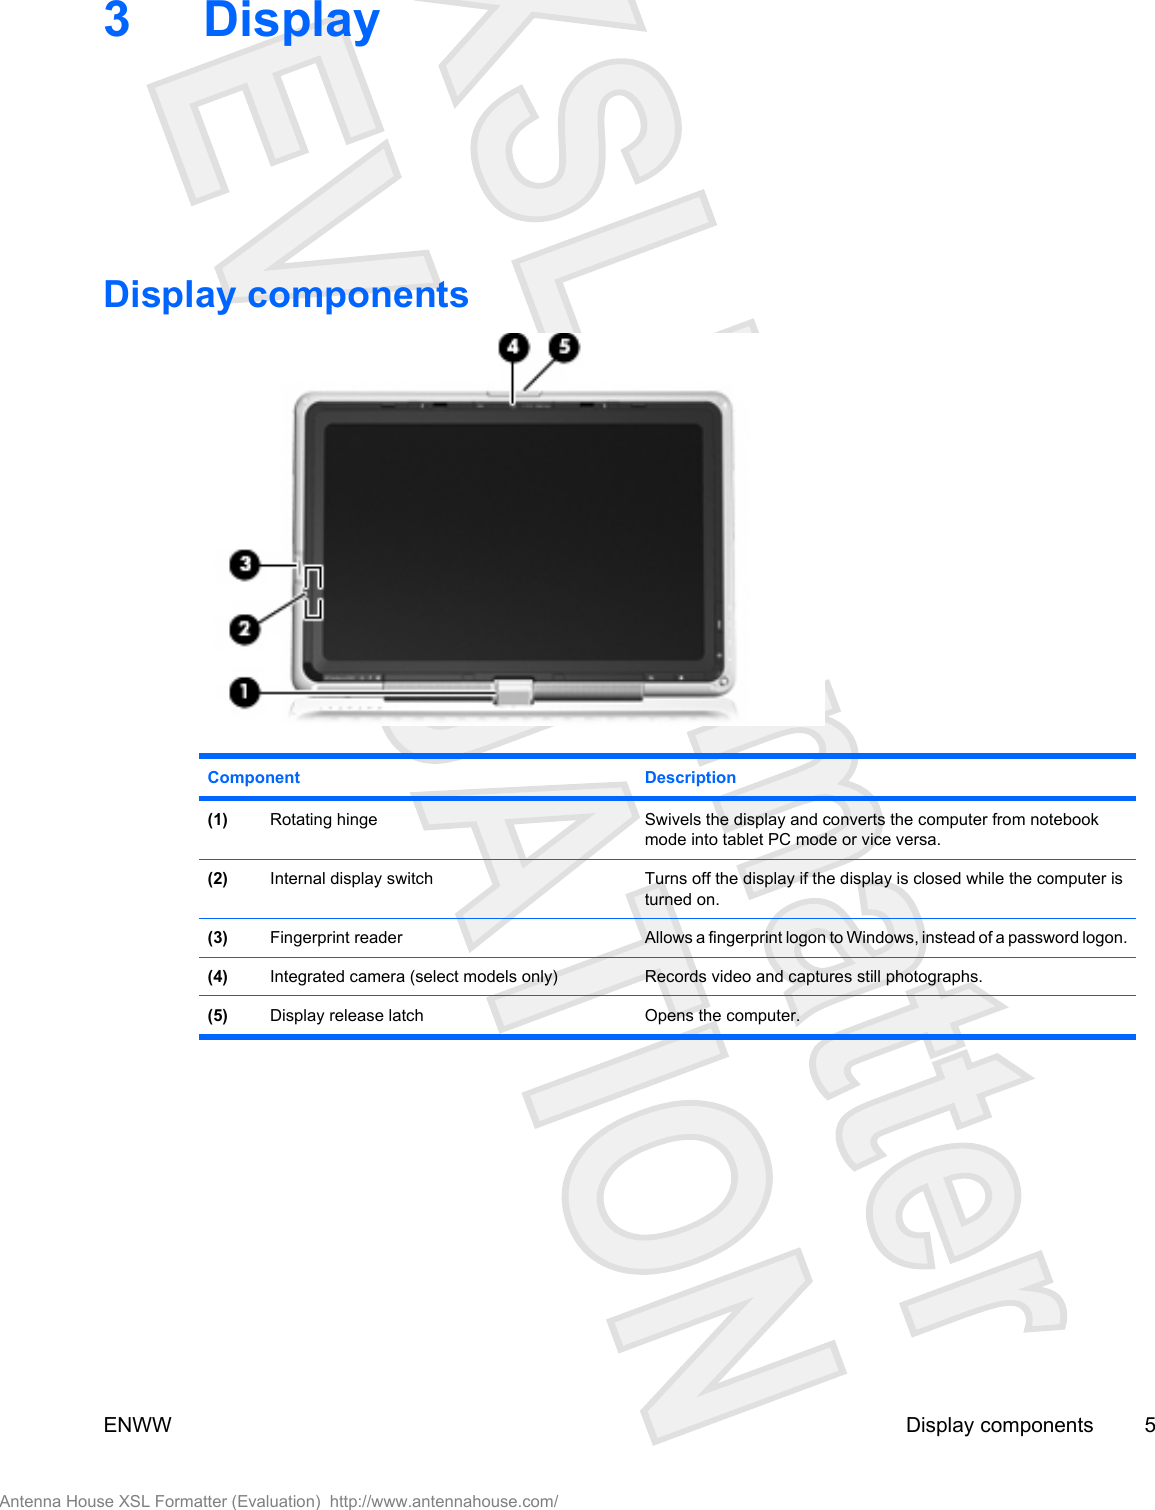 3DisplayDisplay componentsComponent Description(1) Rotating hinge Swivels the display and converts the computer from notebookmode into tablet PC mode or vice versa.(2) Internal display switch Turns off the display if the display is closed while the computer isturned on.(3) Fingerprint reader Allows a fingerprint logon to Windows, instead of a password logon.(4) Integrated camera (select models only) Records video and captures still photographs.(5) Display release latch Opens the computer.ENWW Display components 5Antenna House XSL Formatter (Evaluation)  http://www.antennahouse.com/